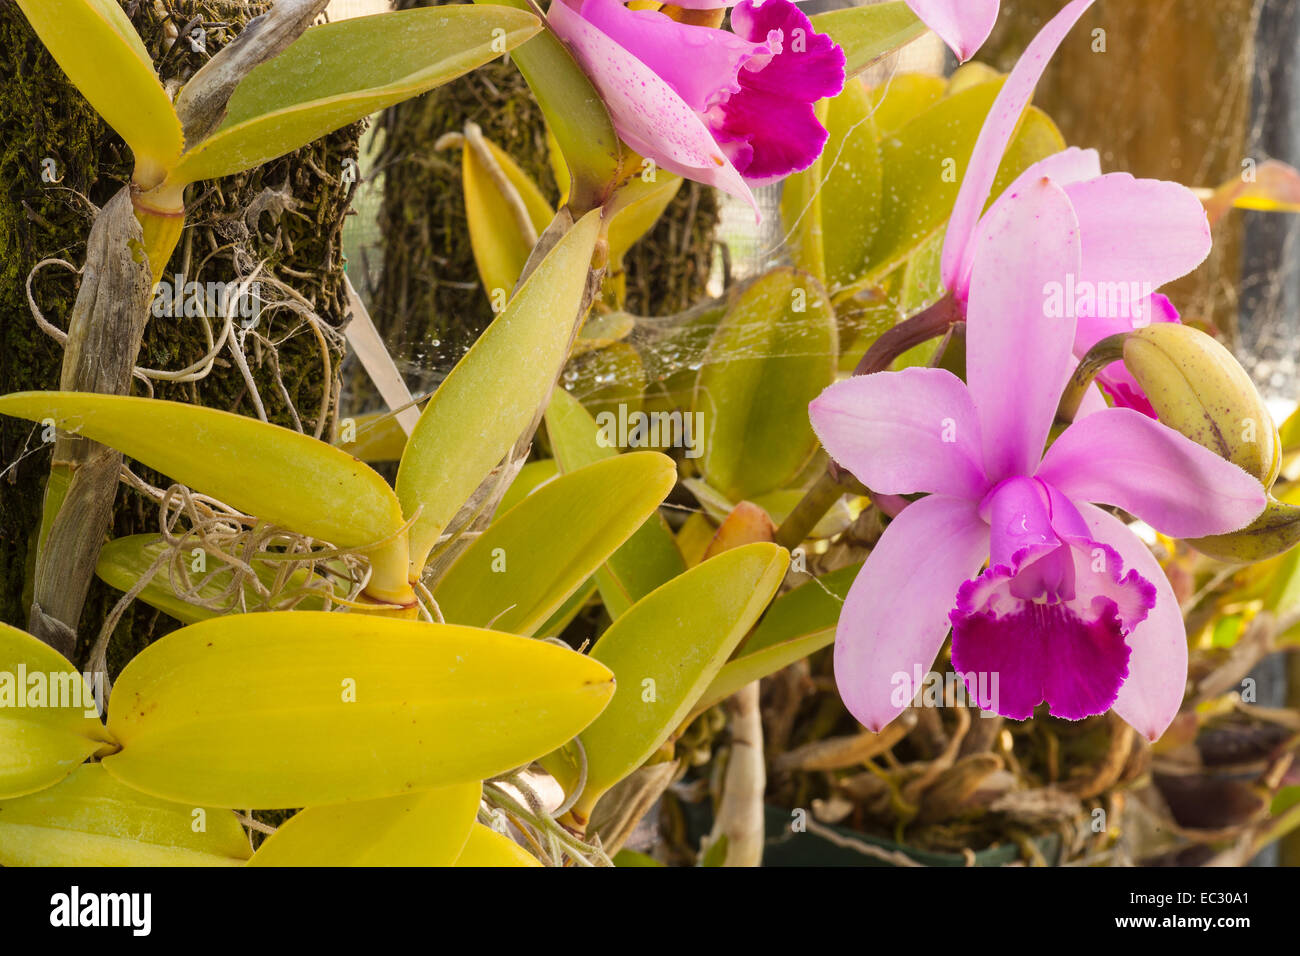 laelia orchid grows on bark in Don Brown's shade house, Santa Barbara, California, United States of America Stock Photo